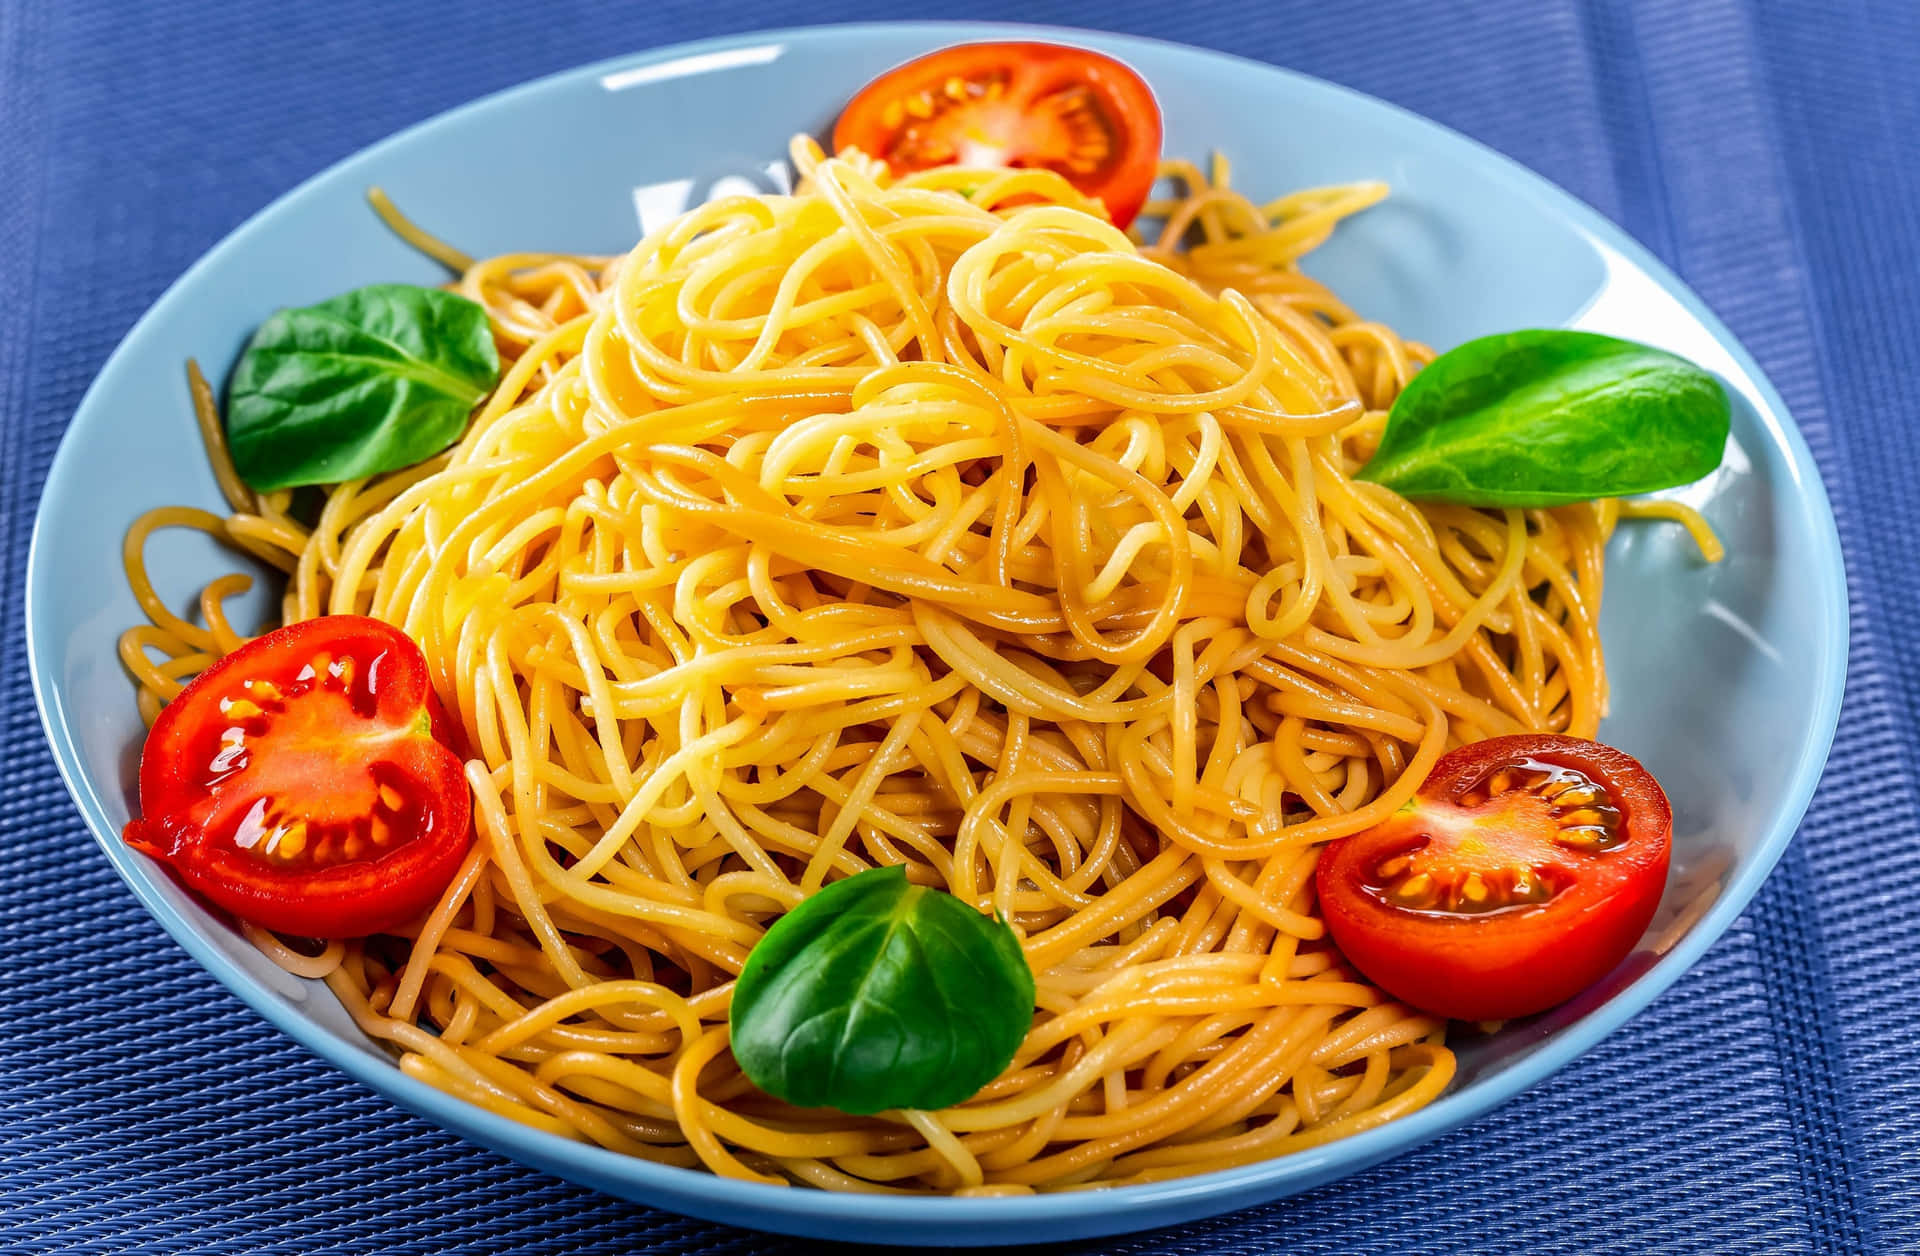 Spaghetti Pasta Noodles With Tomatoes Wallpaper